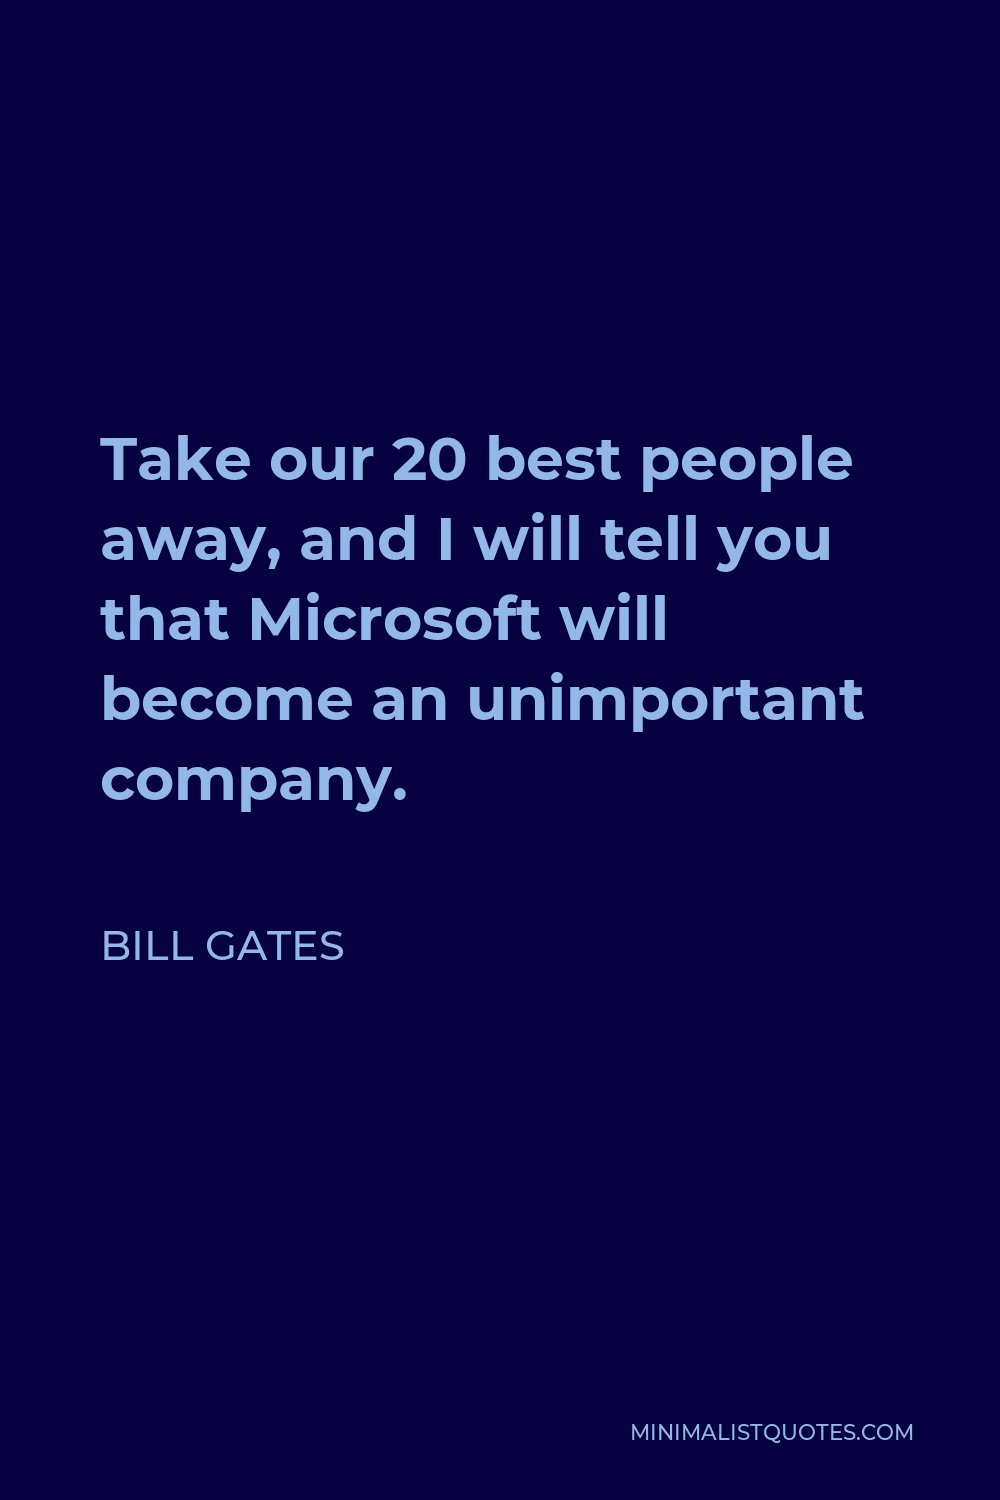 Bill Gates Quote - Take our 20 best people away, and I will tell you that Microsoft will become an unimportant company.